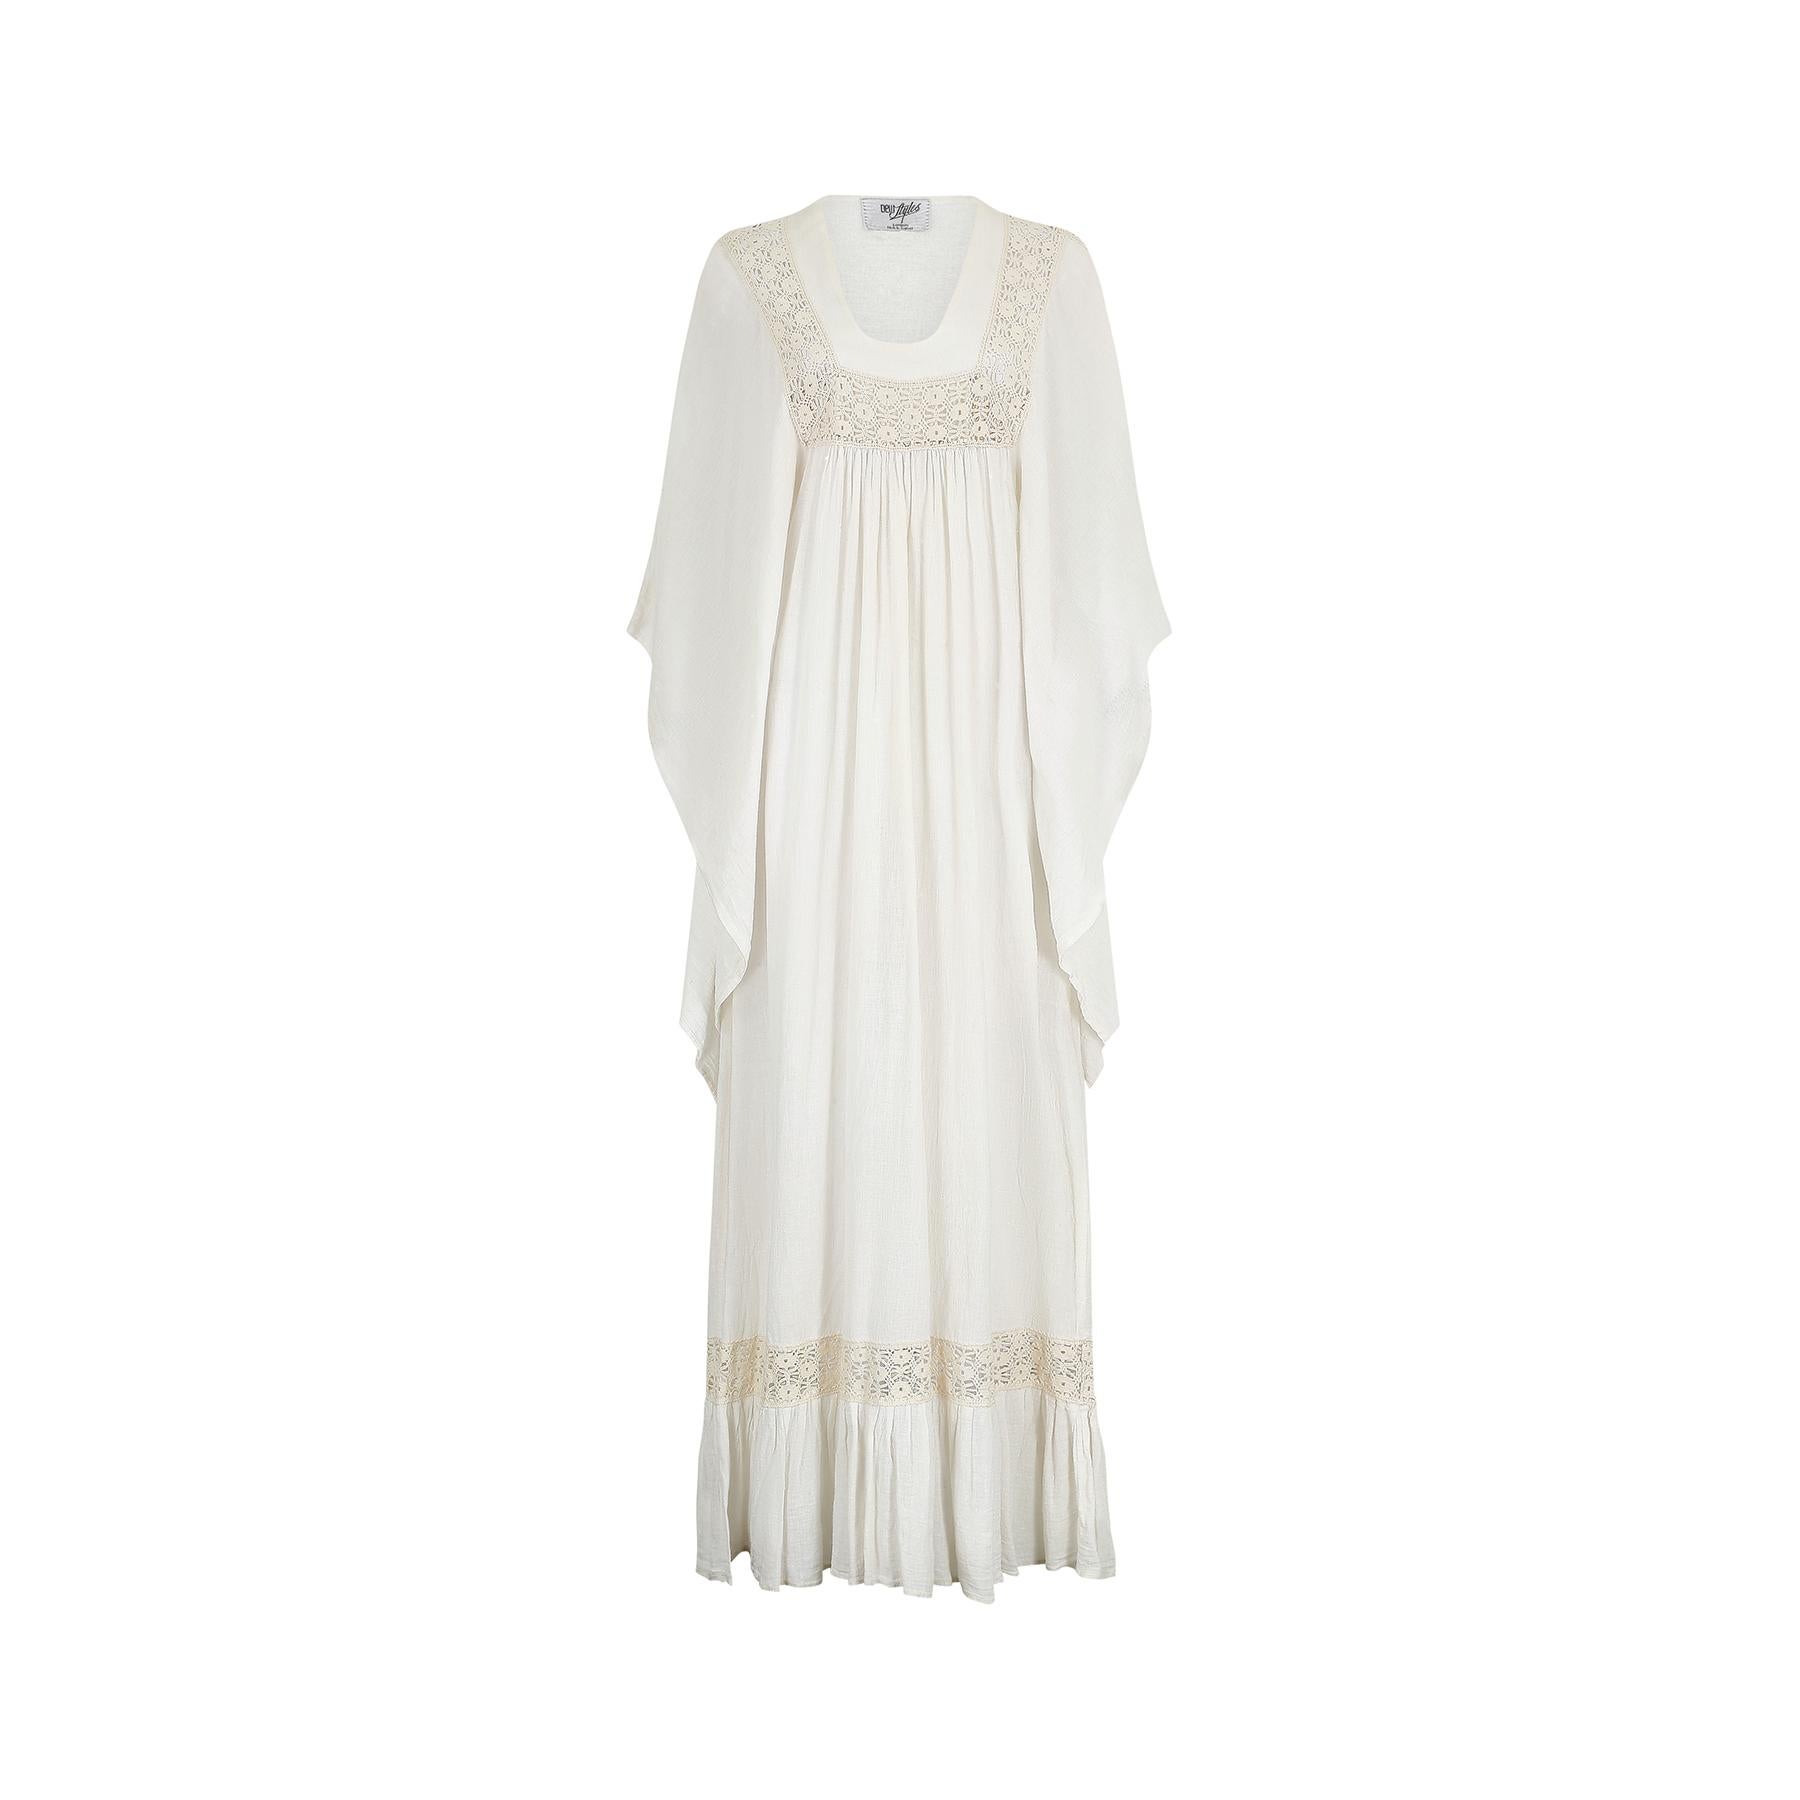 1970s Dew Styles White Cotton Angel-Sleeve Dress In Excellent Condition For Sale In London, GB